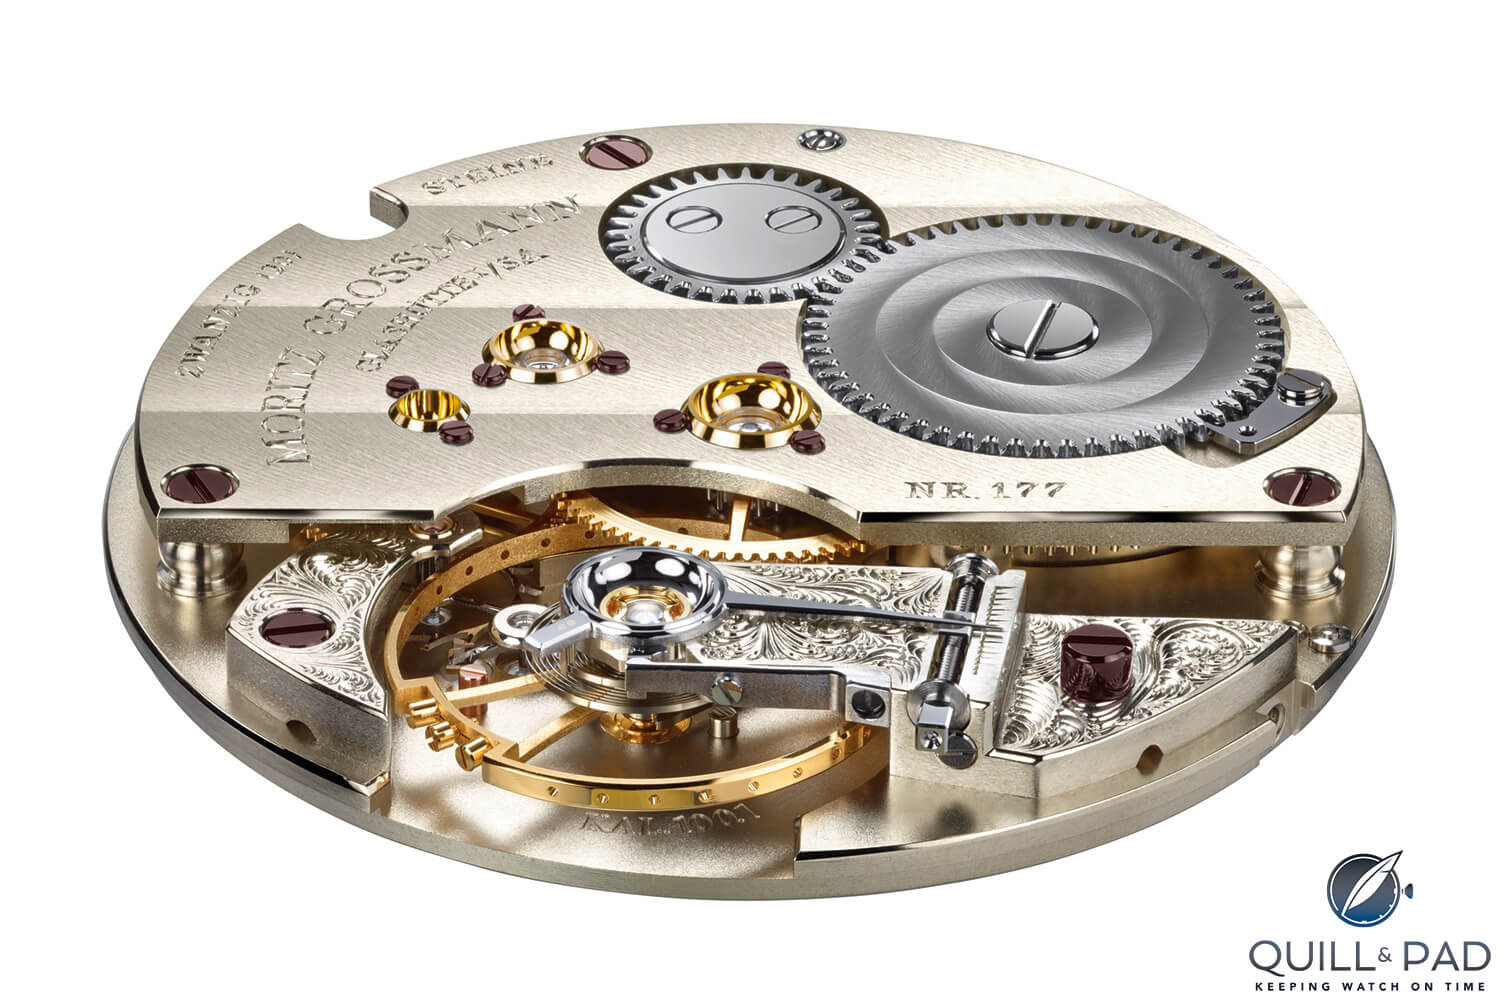 Atum Caliber 100.1, which powersthe Moritz Grossmann Atum Homage for Only Watch 2017